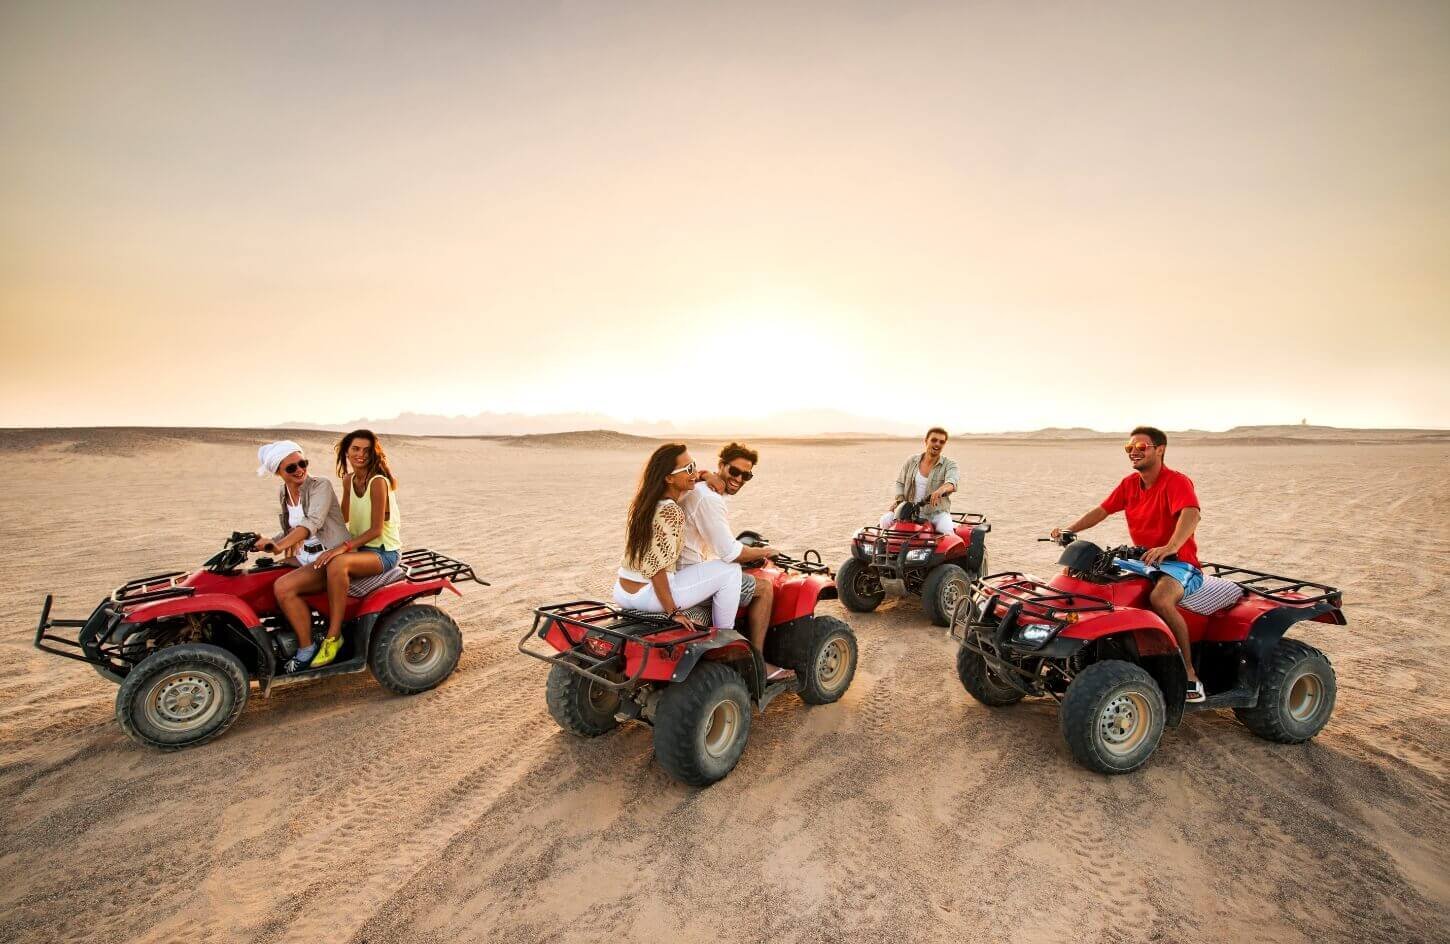 a-wonderful-shot-of-some-of-our-visitors-in-the-pyramids-area-while-they-were-riding-quad-bikes